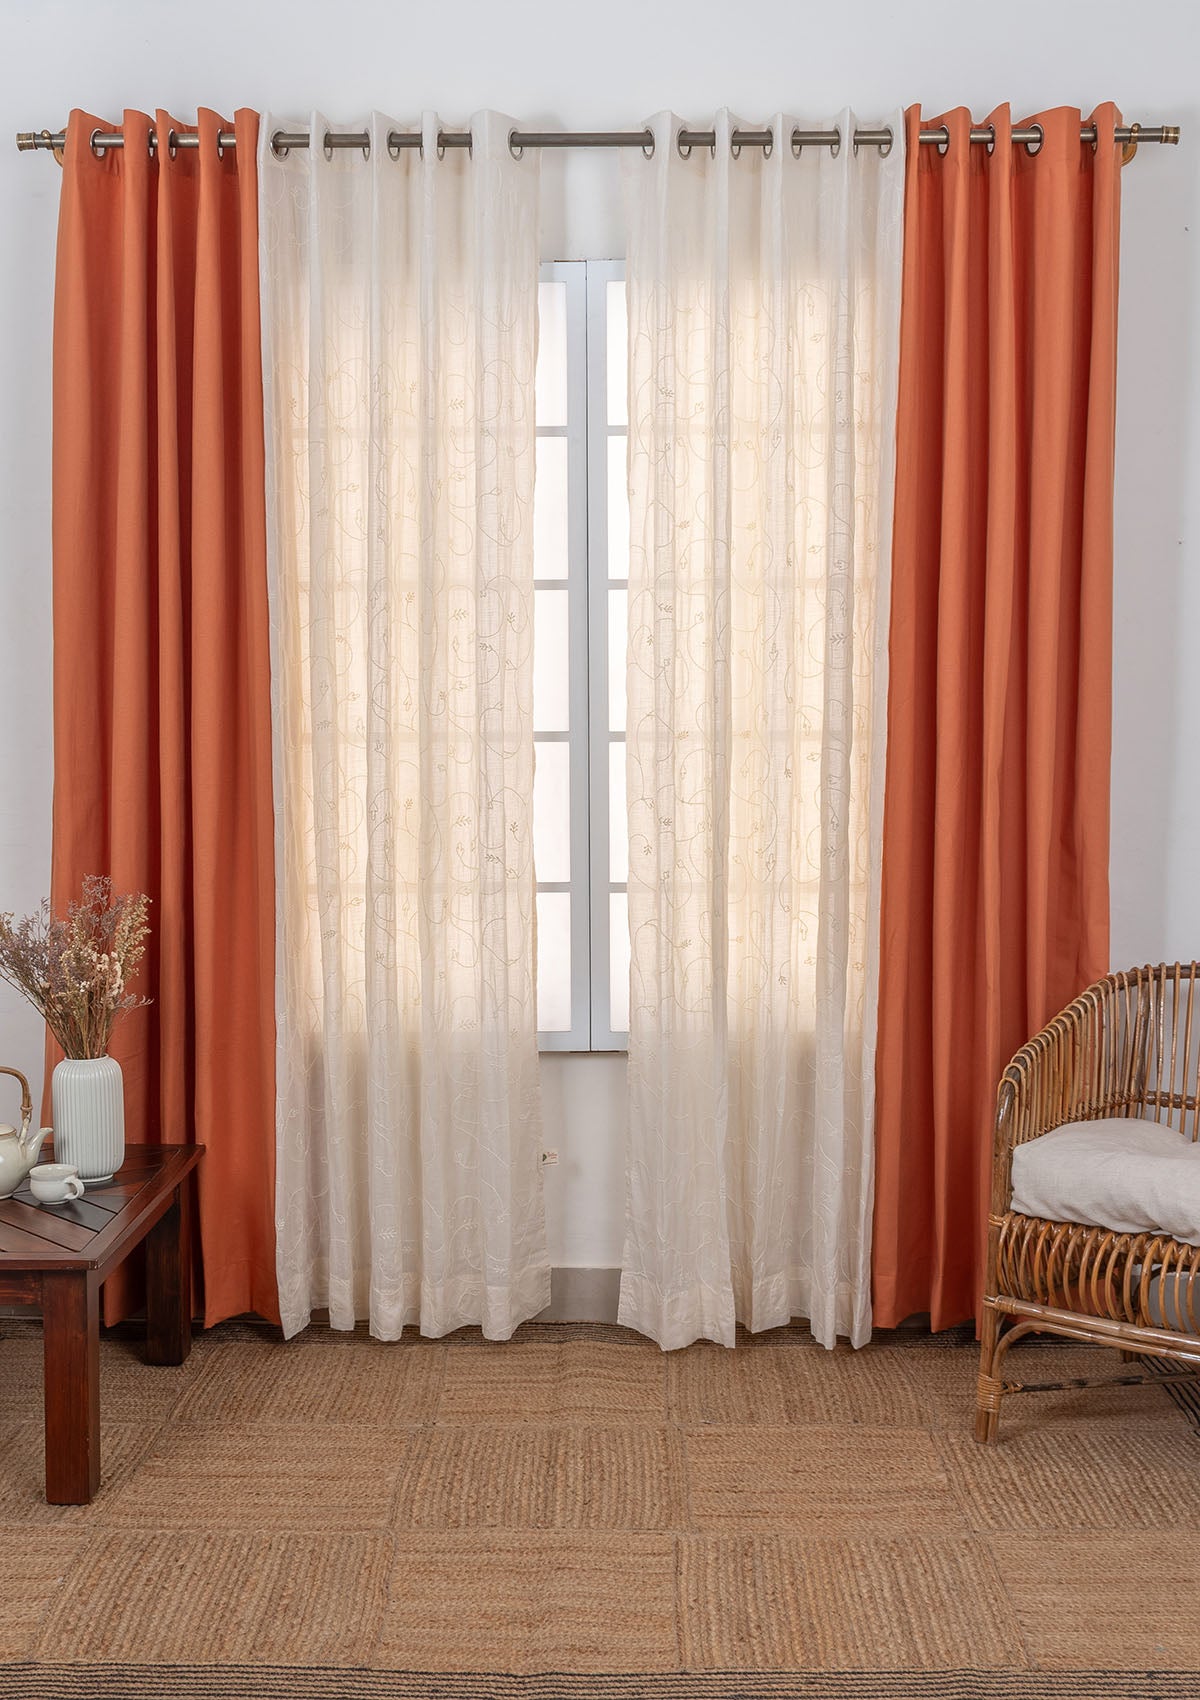 Solid Orange cotton curtain with Ivy vines cream embroidered sheer 100% cotton curtains for living room - Set of 4